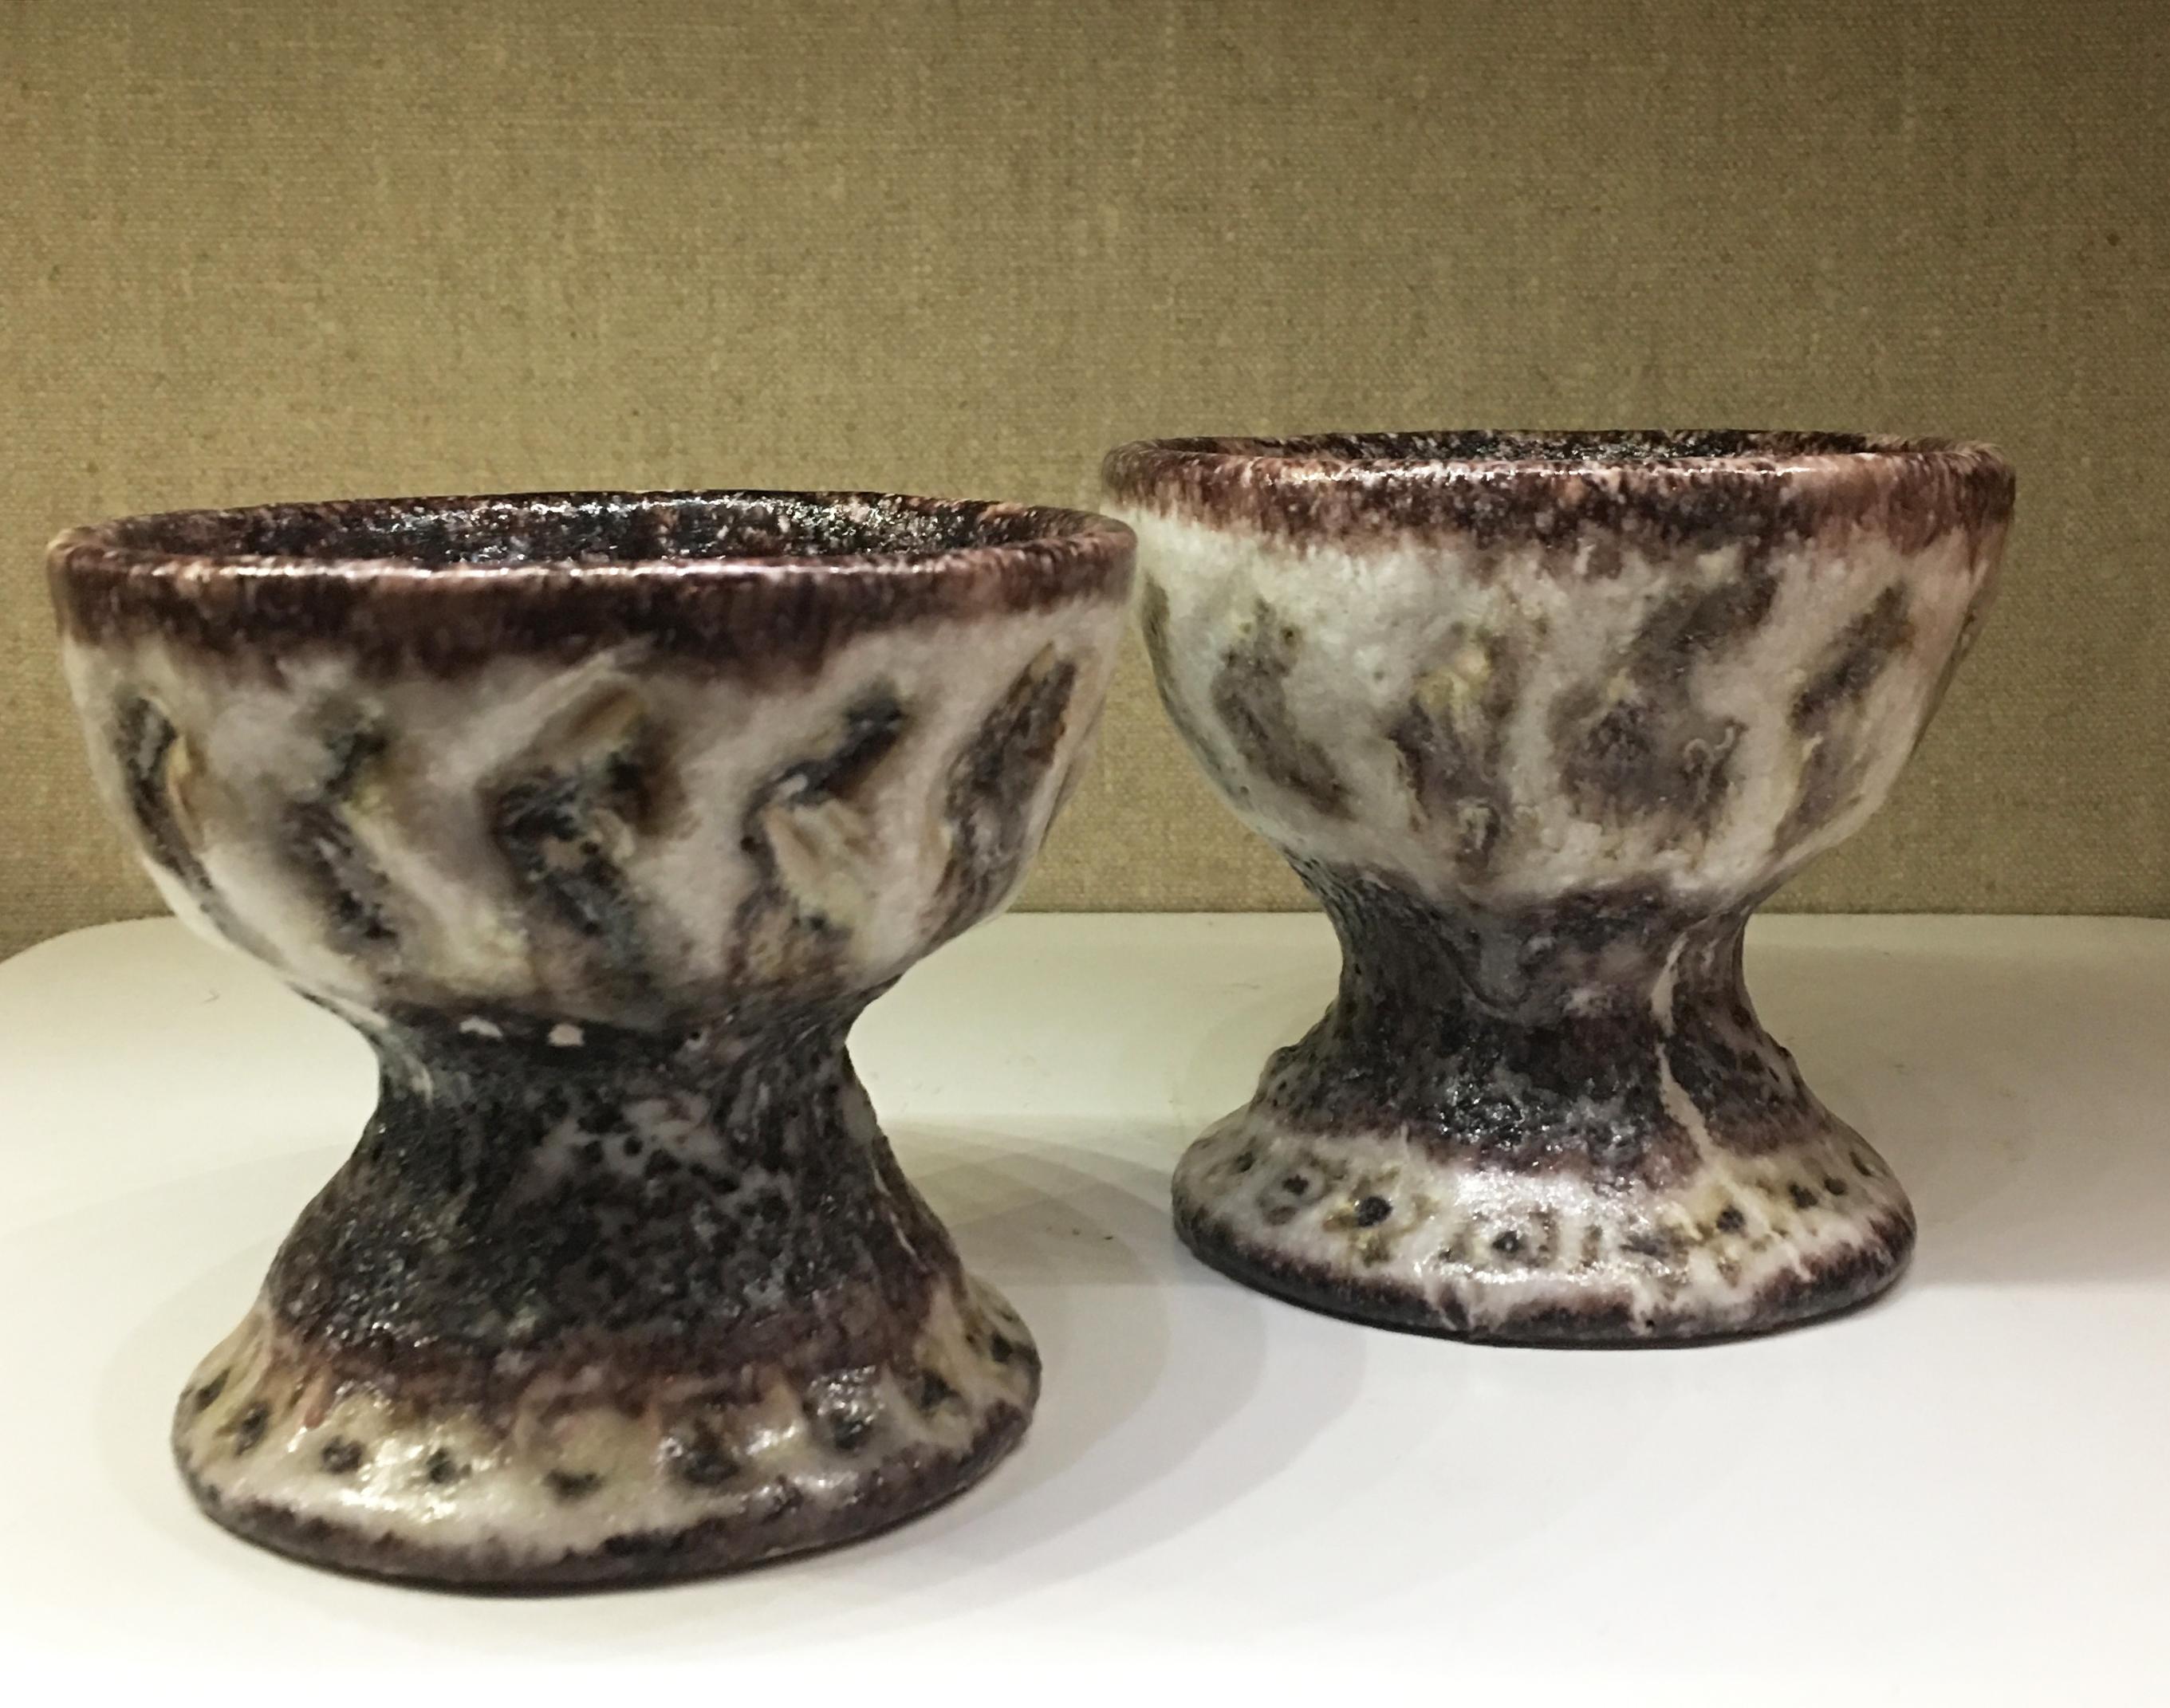 Candle holders by Guidio Gambone with Egyptian Paste Glaze. Ceramic Signed to the bottom of each examples.
4